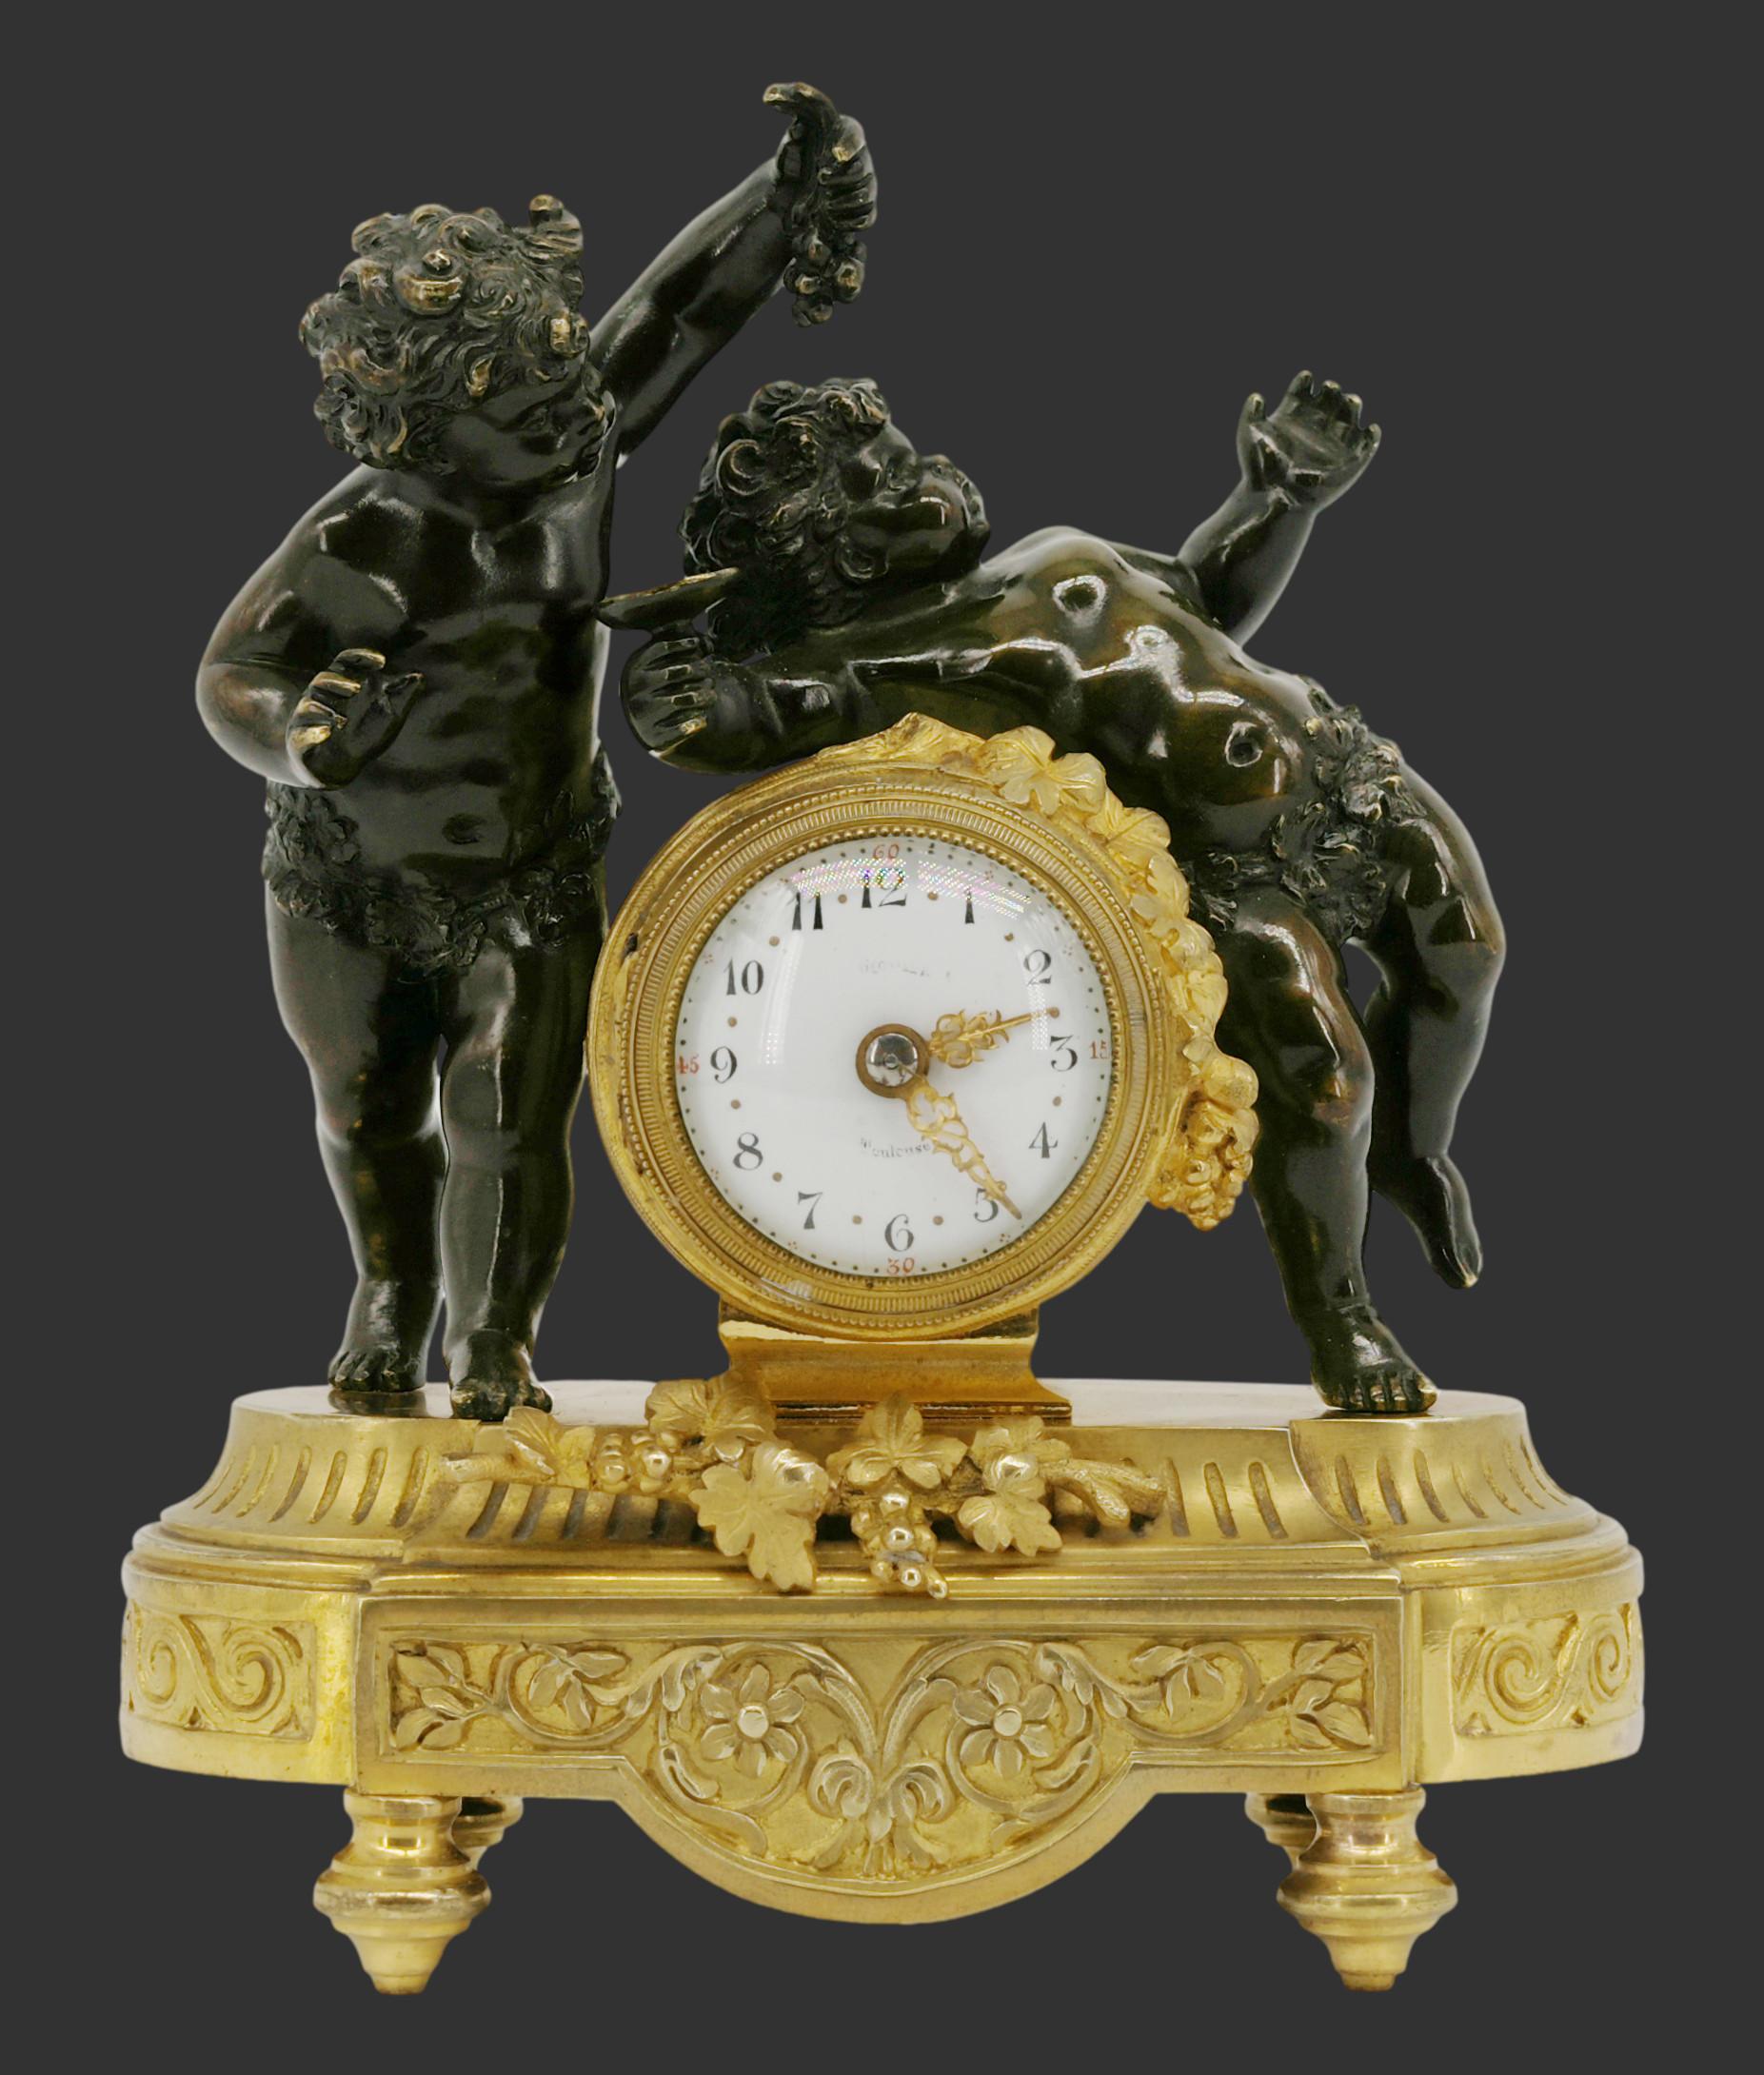 French Napoleon III bronze Bacchus putti clock, France, 1870s Height: 7.4